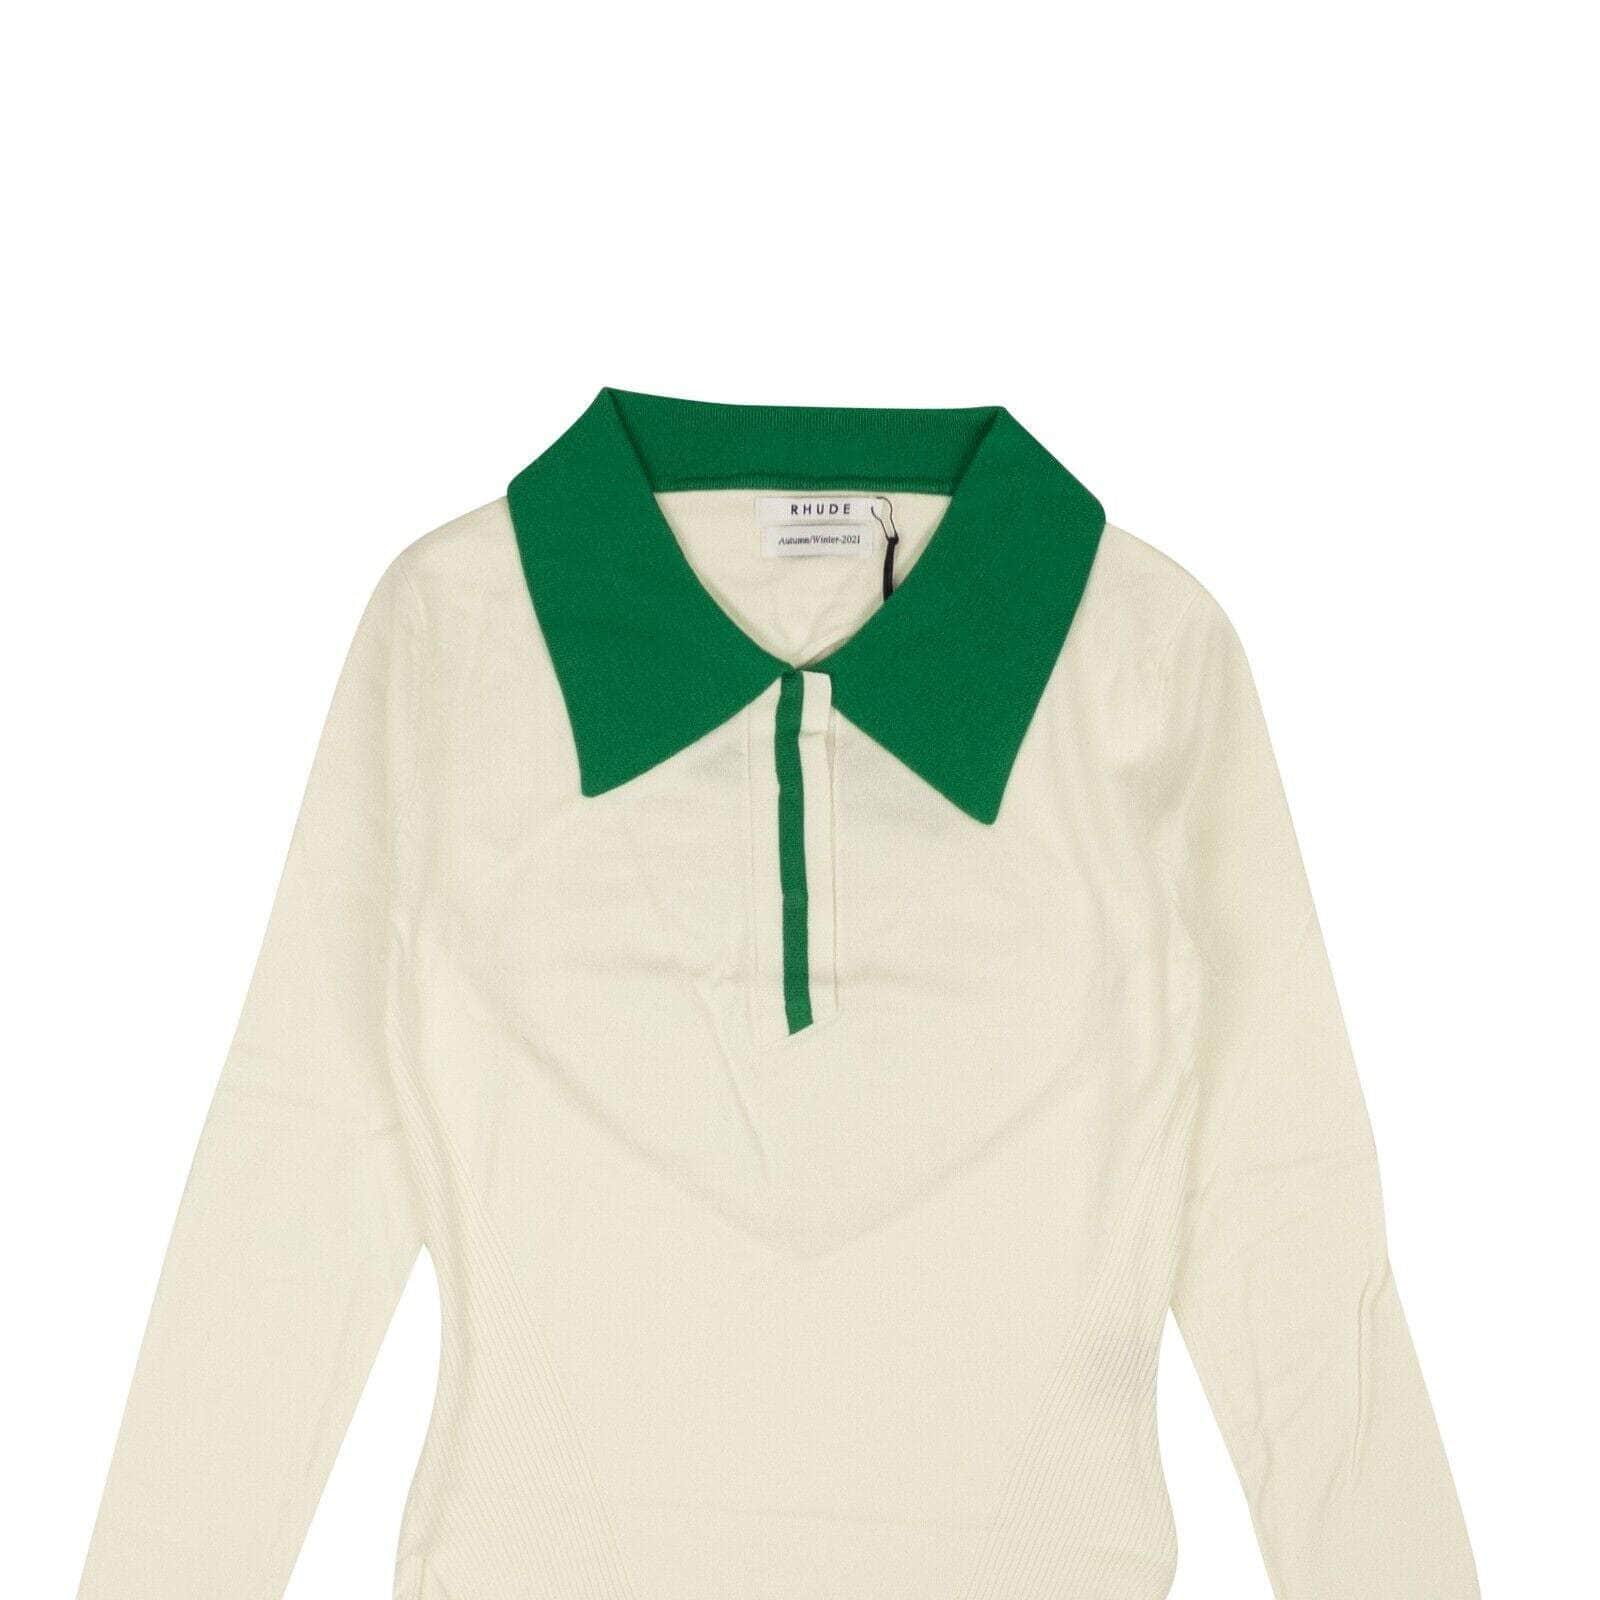 Rhude 250-500, channelenable-all, chicmi, couponcollection, gender-womens, main-clothing, rhude, size-s S Cream And Green Viscose F-1 Long Sleeve Polo Shirt RHD-XTPS-0049/S RHD-XTPS-0049/S